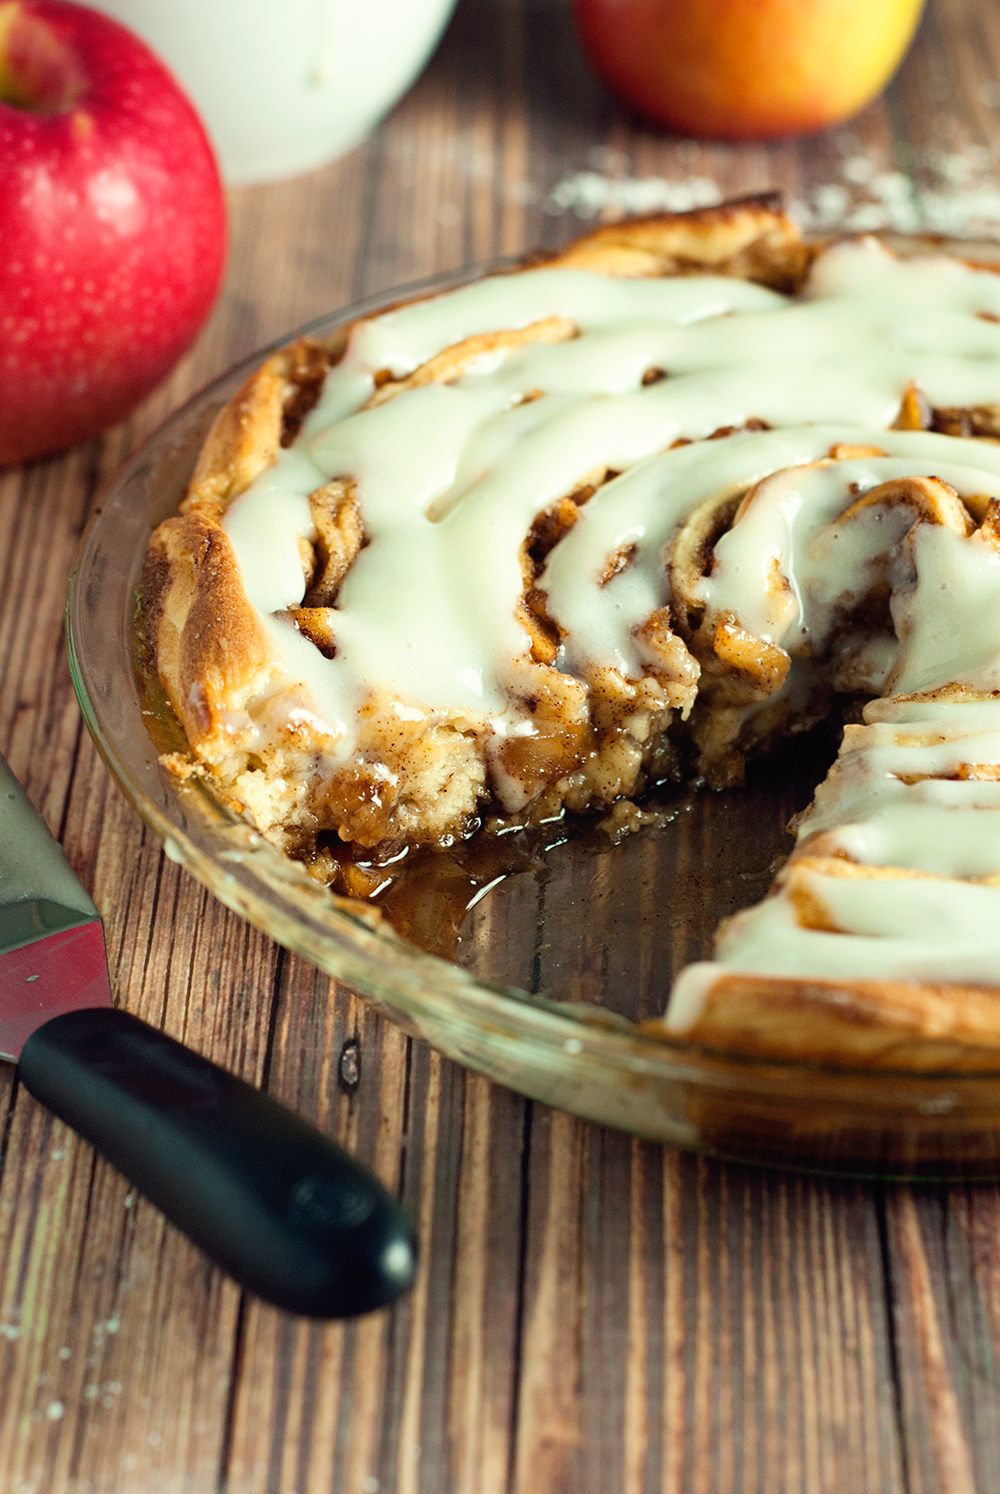 Decadently delicious, this spiced apple cinnamon roll cake with blow you away with flavor!